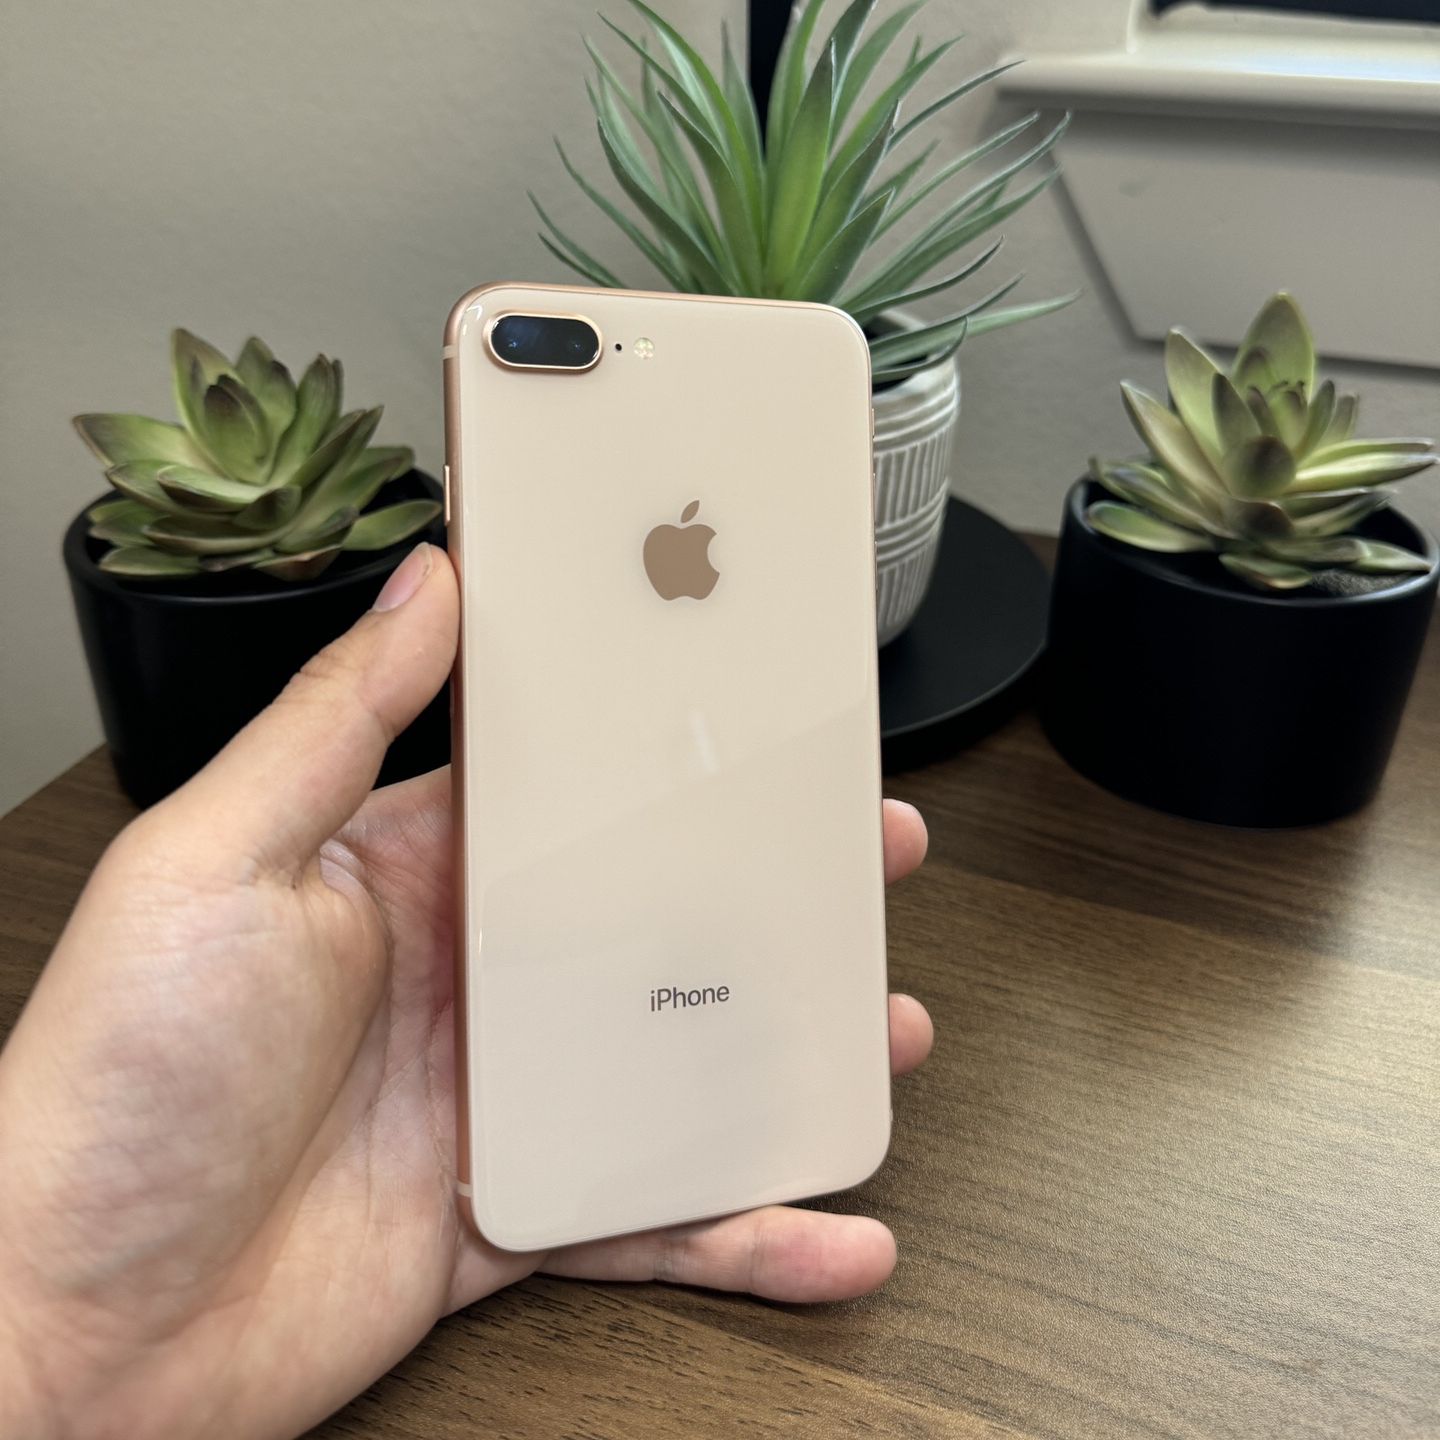 iPhone 8 Plus 64gb Rose Gold 🌸 Unlocked Any Carrier! Verizon AT&T Cricket T-mobile Metro Mexico Tambien 🇲🇽 international